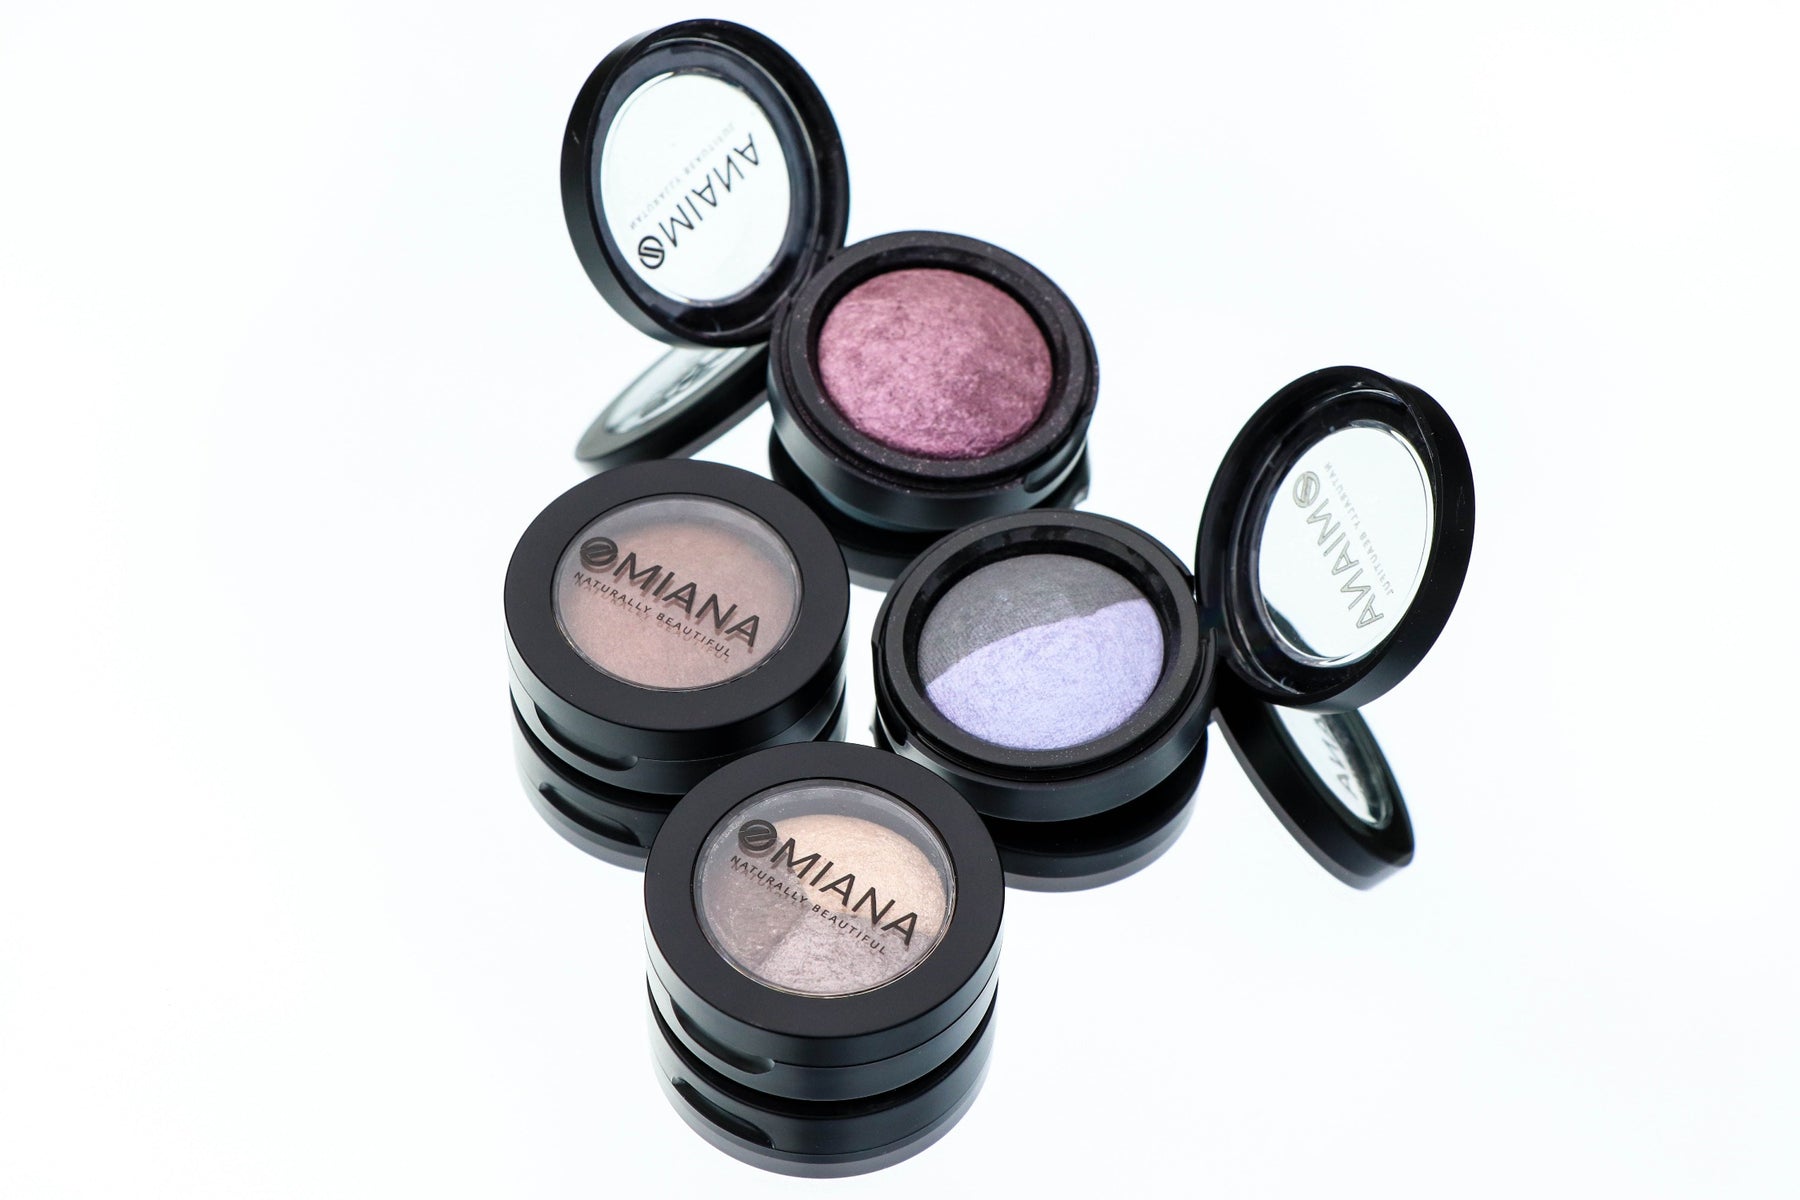 Omiana's Clean Mineral Eyeshadows: Beauty with a Conscience